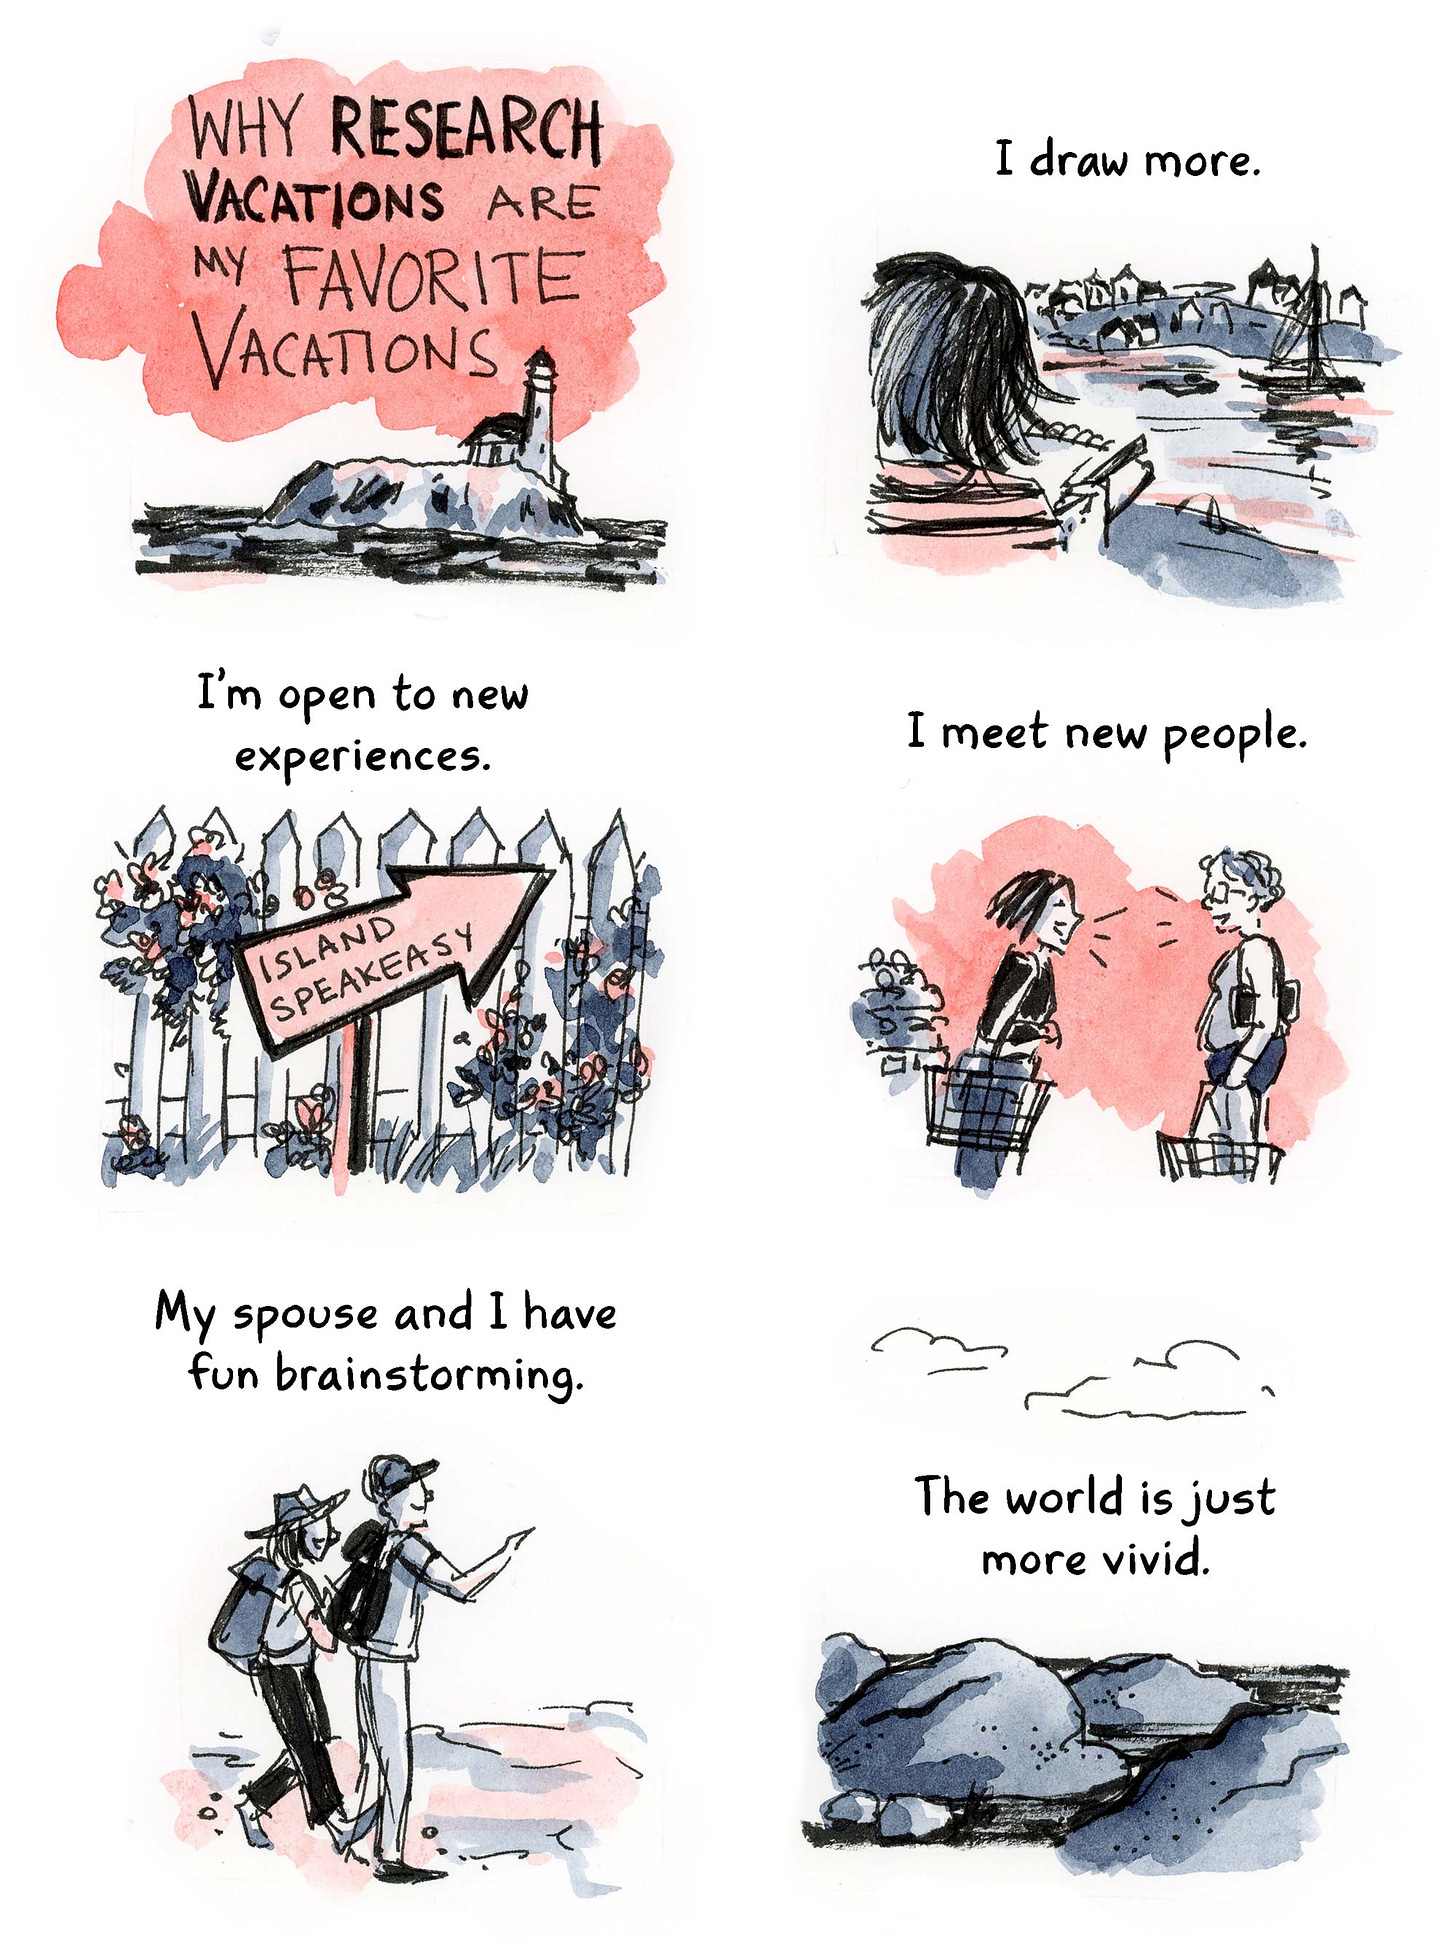 Watercolor diary comic on research vacations by graphic novelist K. Woodman-Maynard